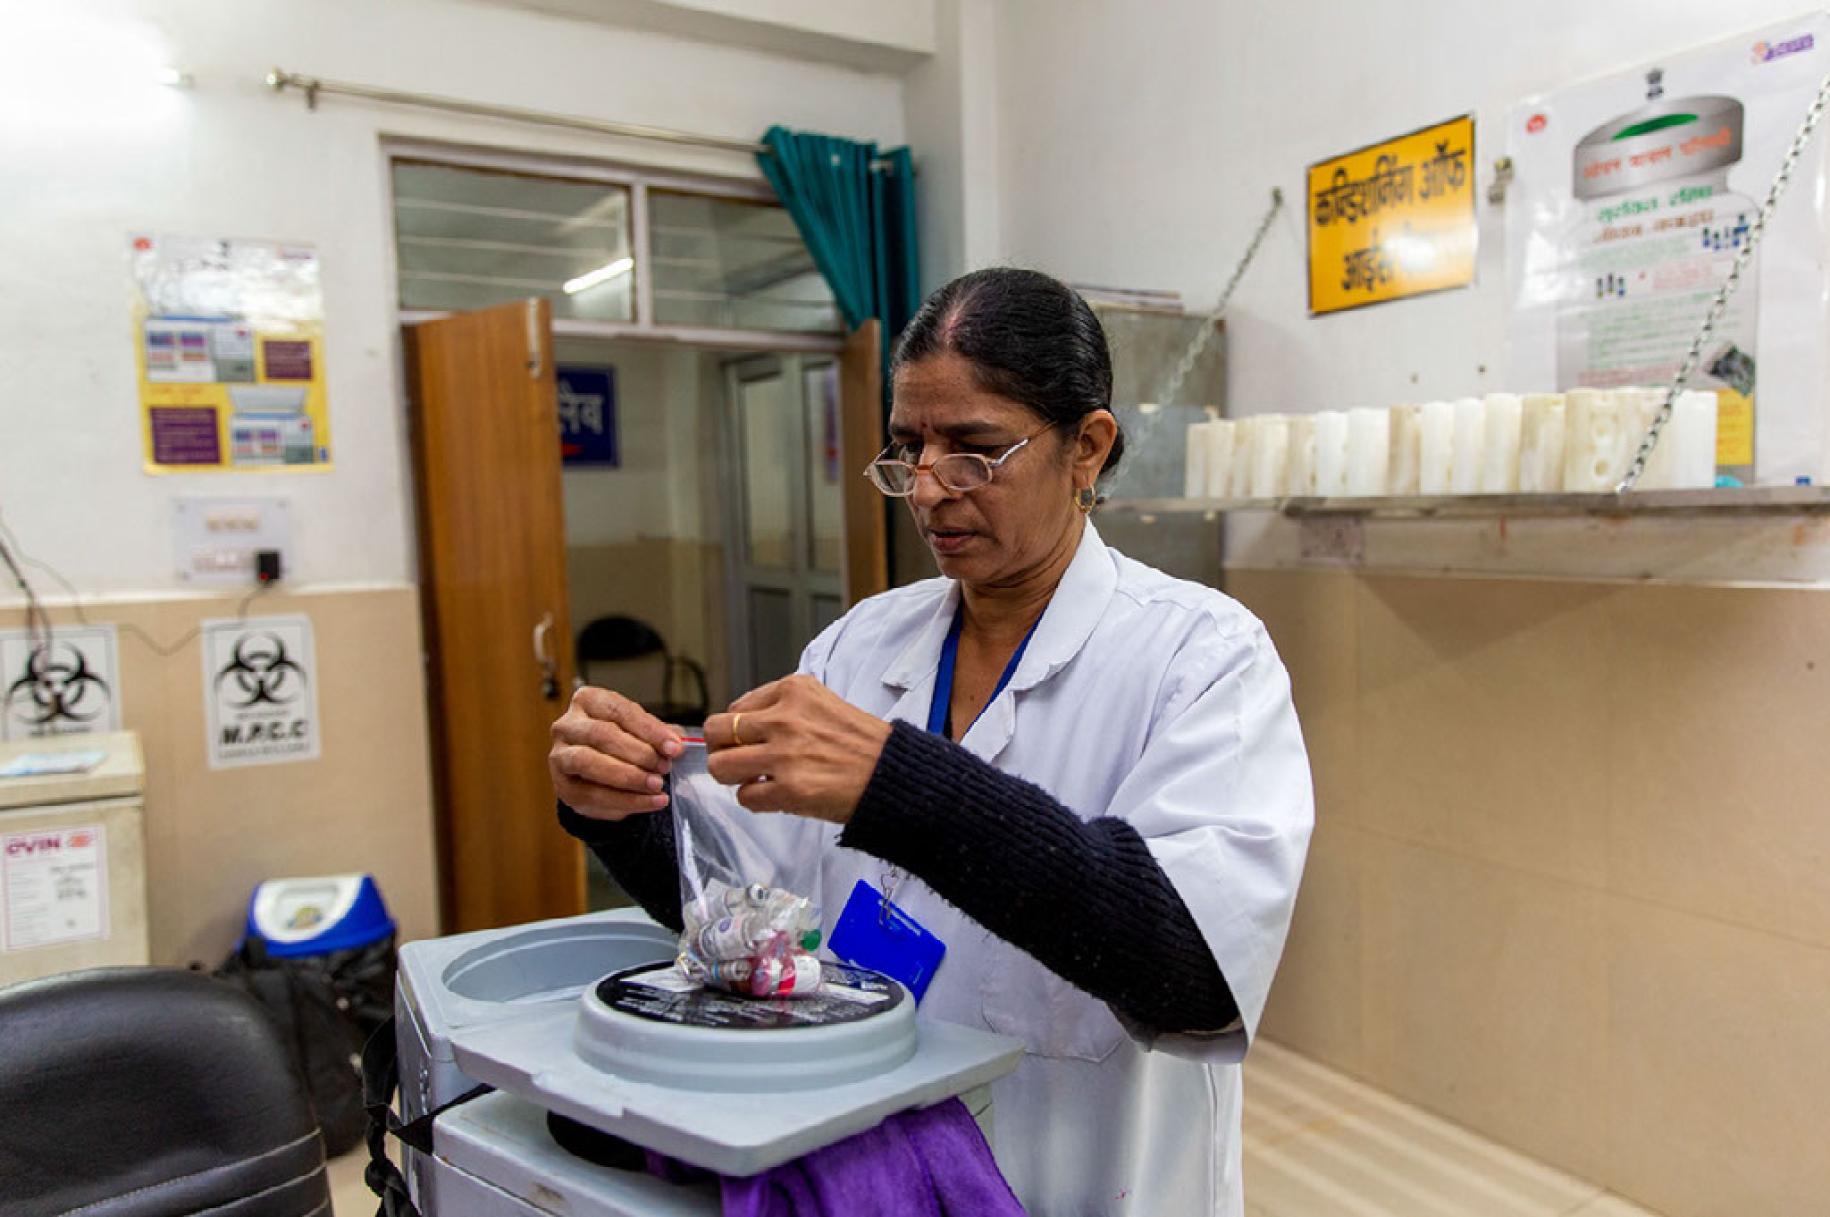 A medical professional collects vaccines and vials in a plastic bag. 